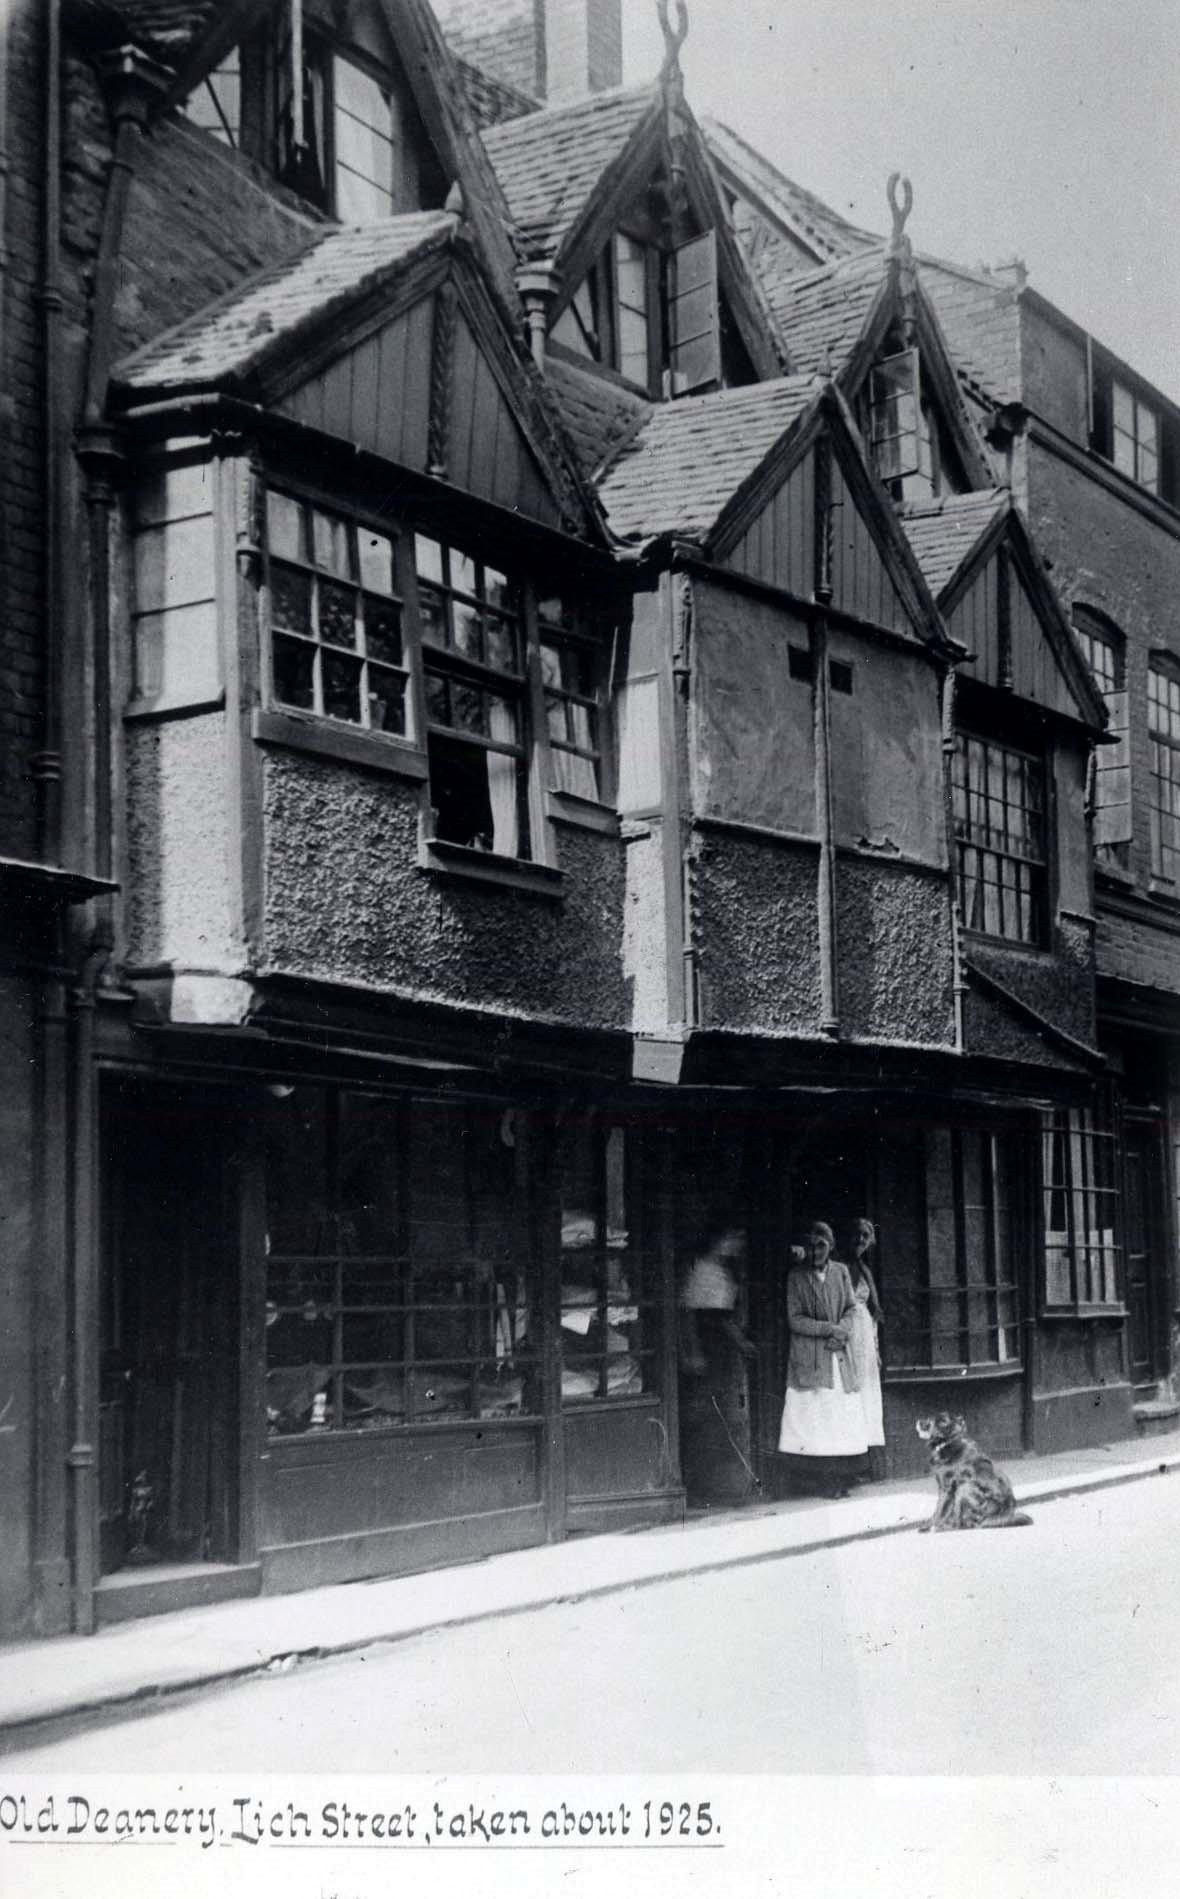 Vanished Worcester. A magnificent view of half-timbered buildings in Lich Street, Worcester